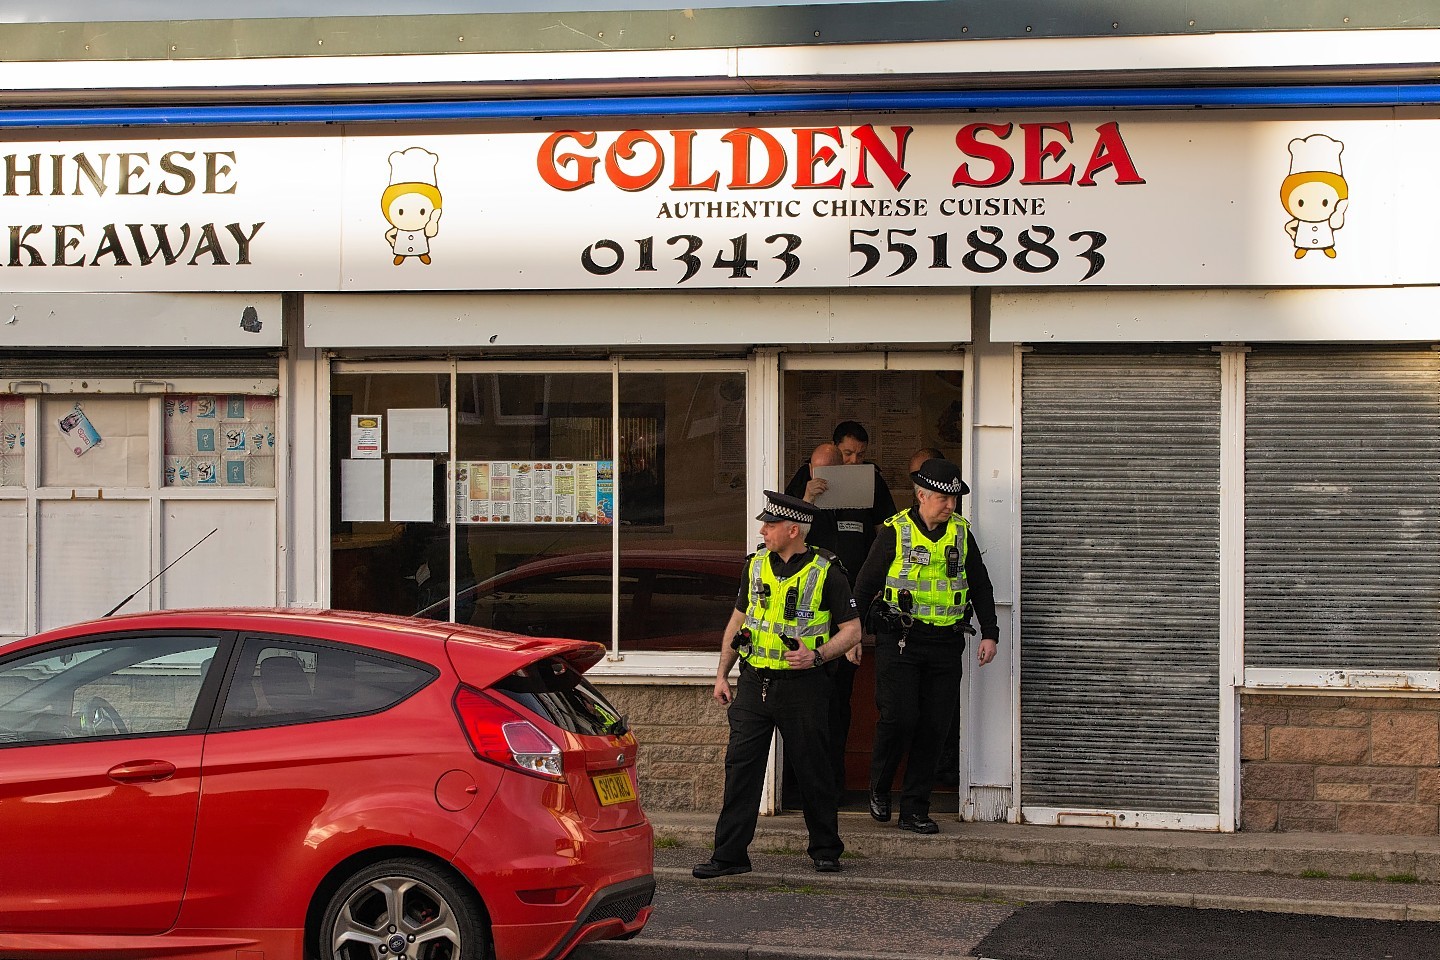 Officers at the Golden Sea restaurant in Elgin